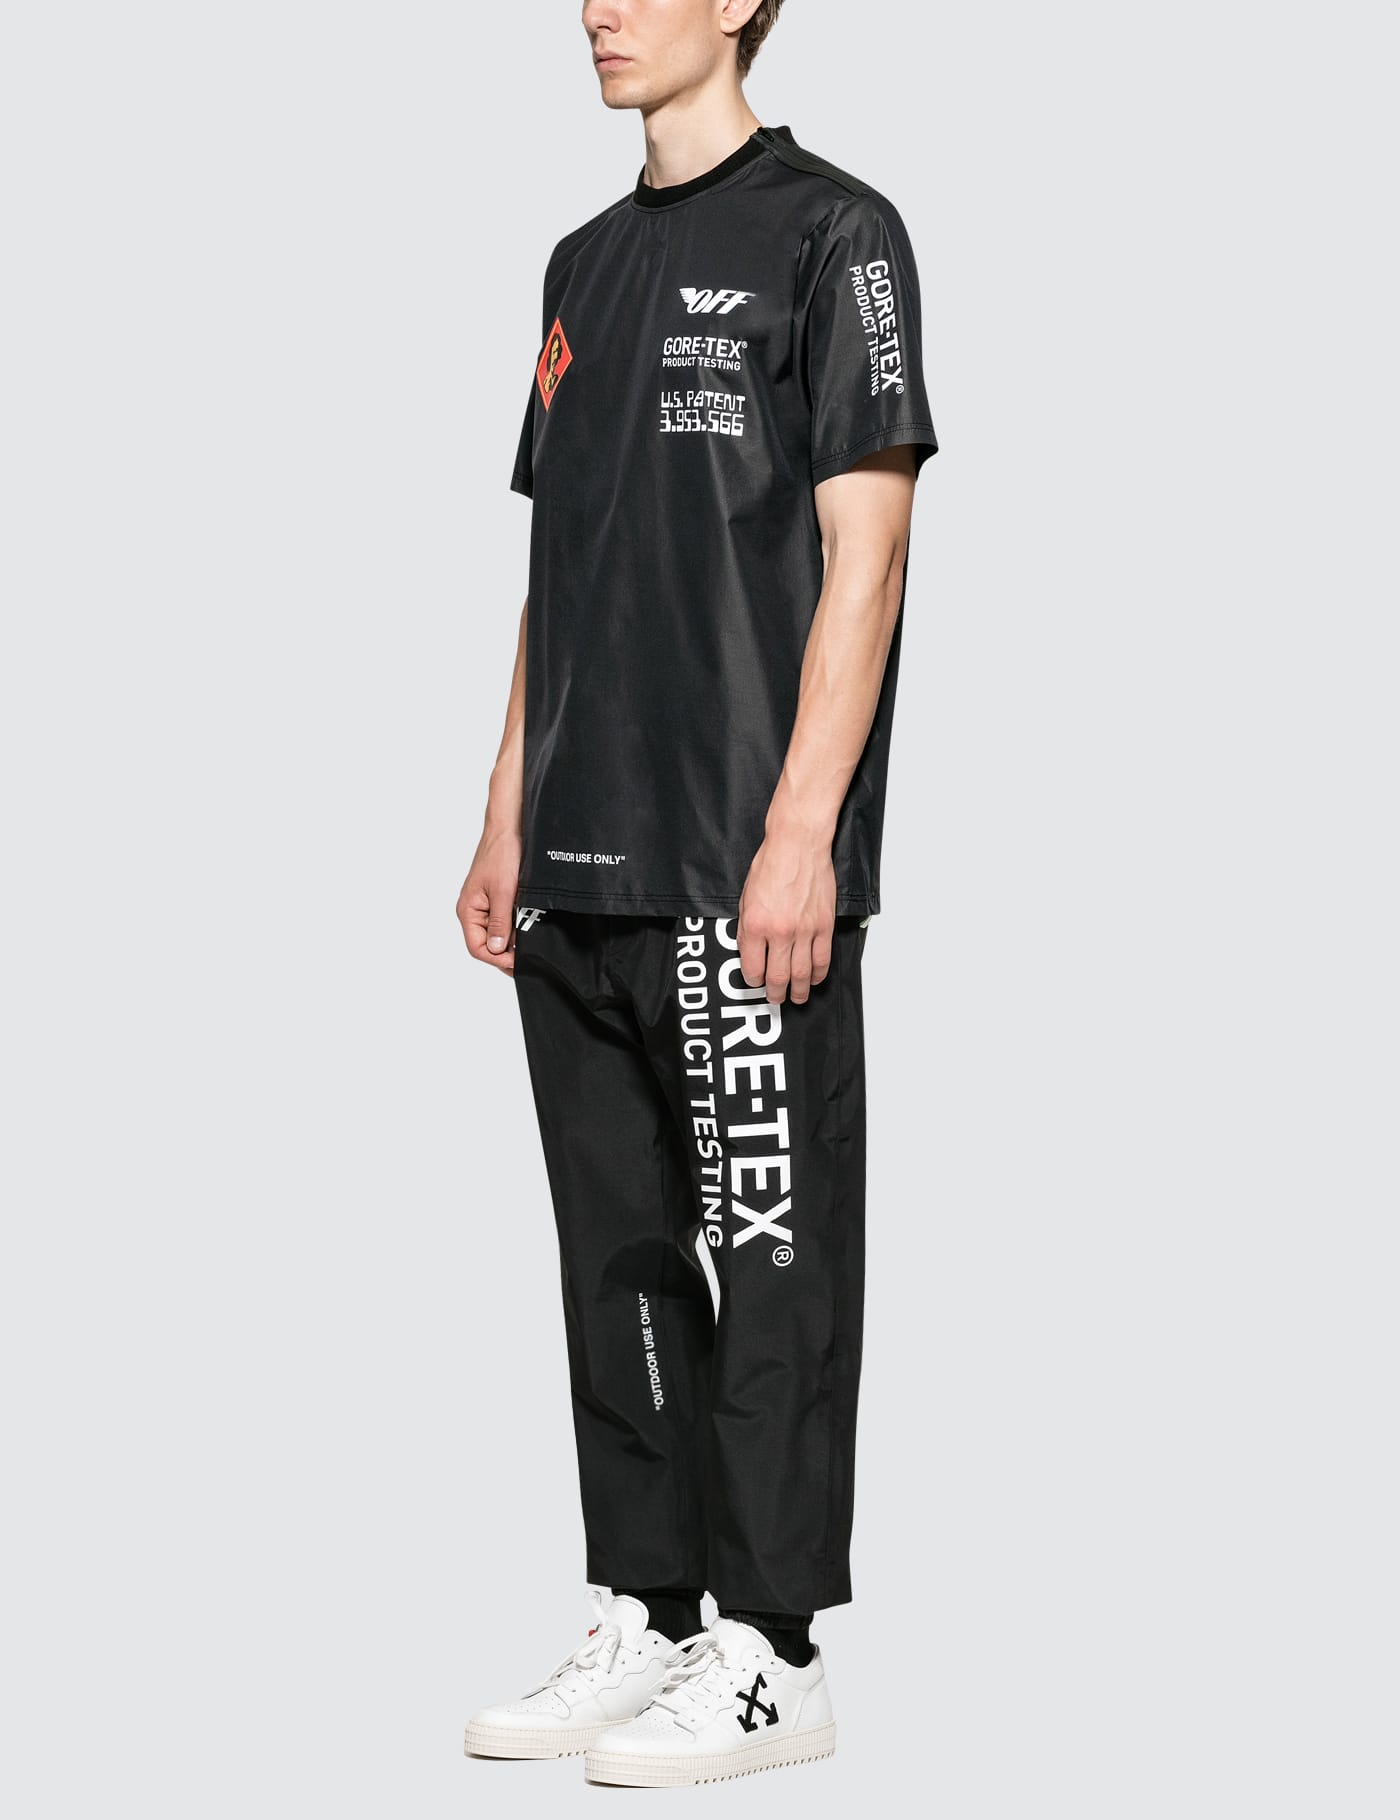 Off-White™ - Gore-Tex S/S T-Shirt | HBX - Globally Curated Fashion